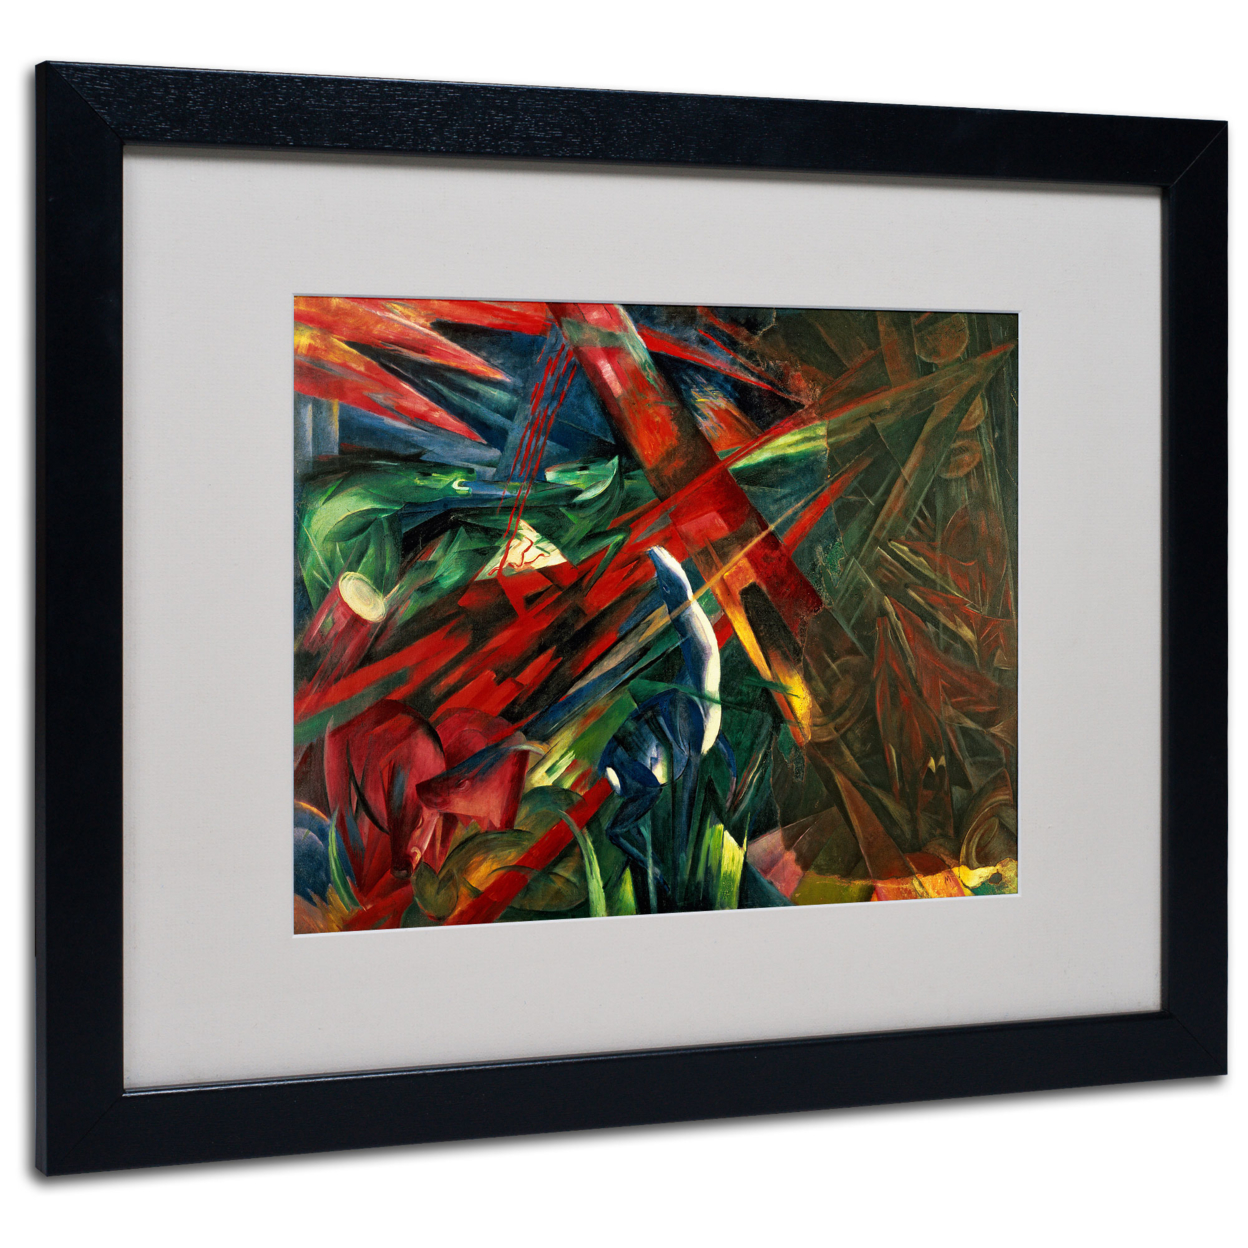 Franz Marc 'Fate Of The Animals 1913' Black Wooden Framed Art 18 X 22 Inches